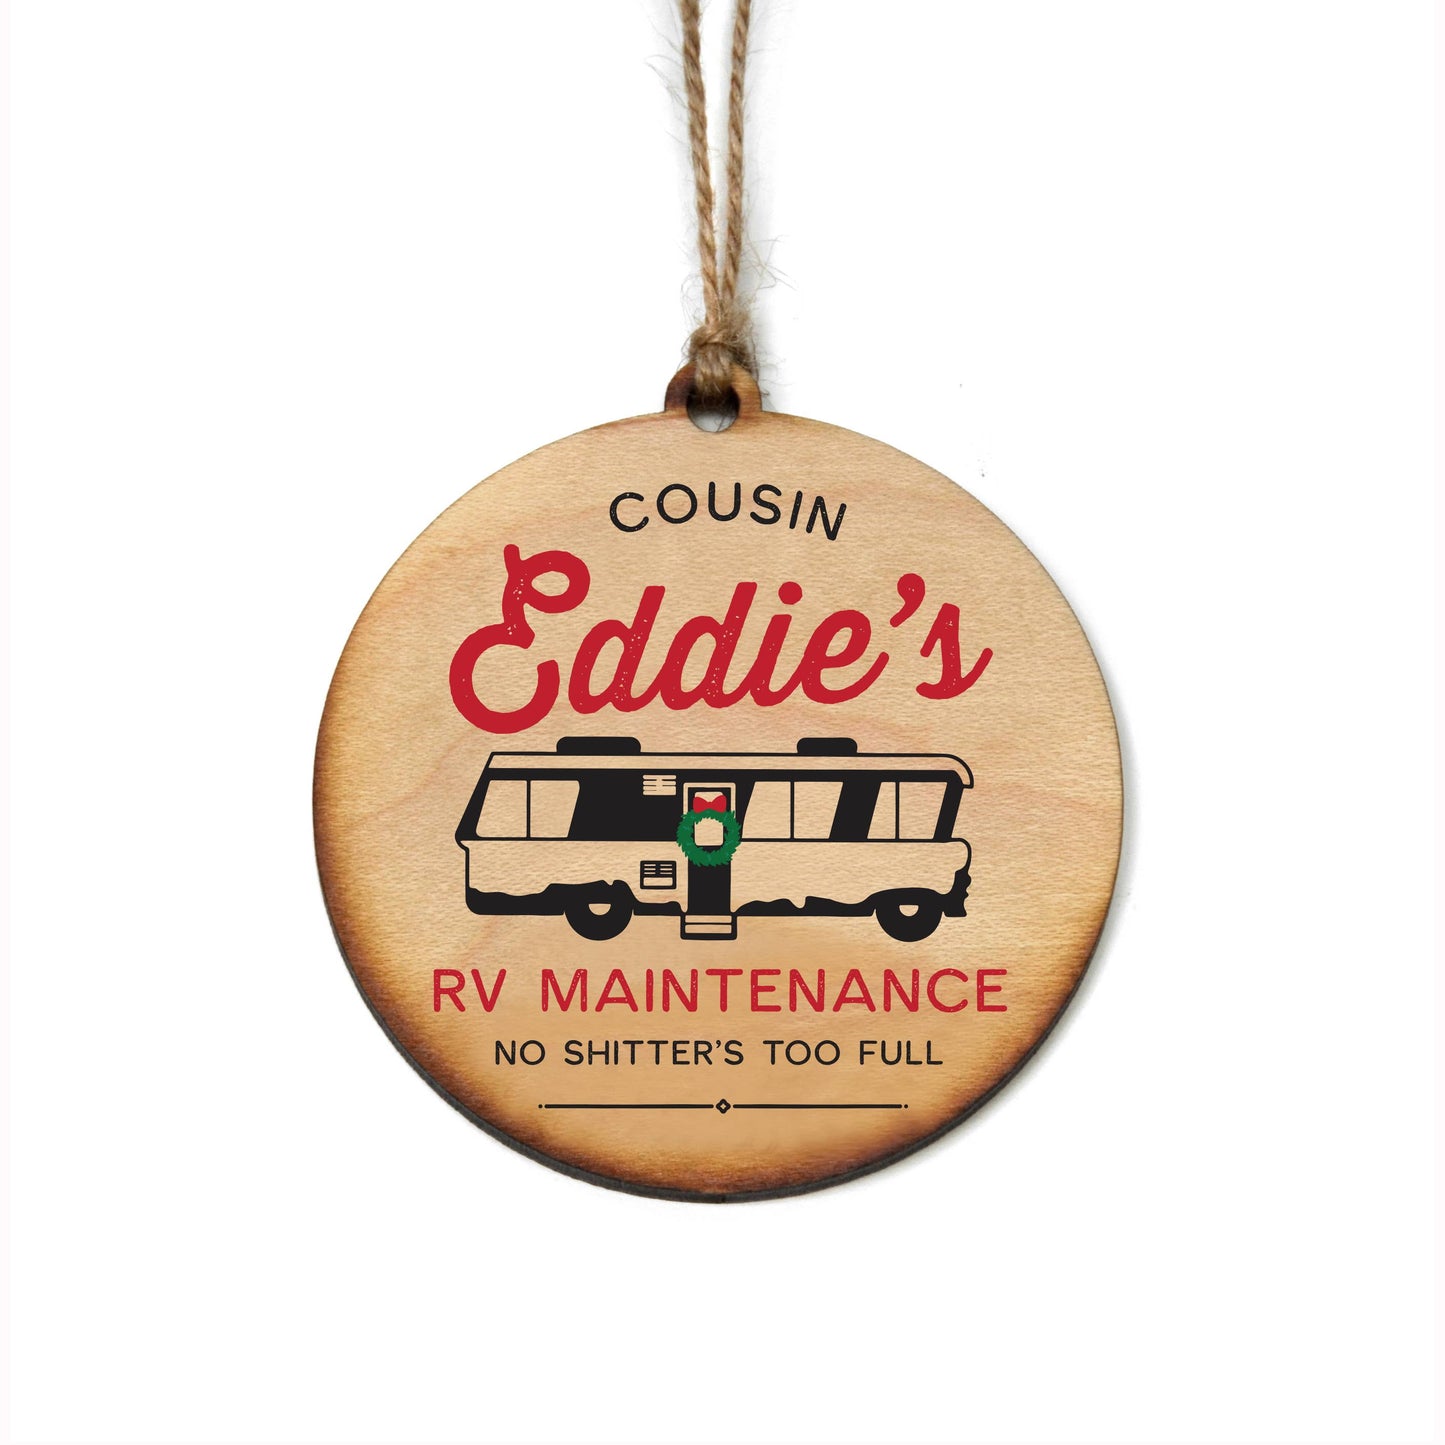 Cousin Eddies Holiday Ornament for Christmas Tree